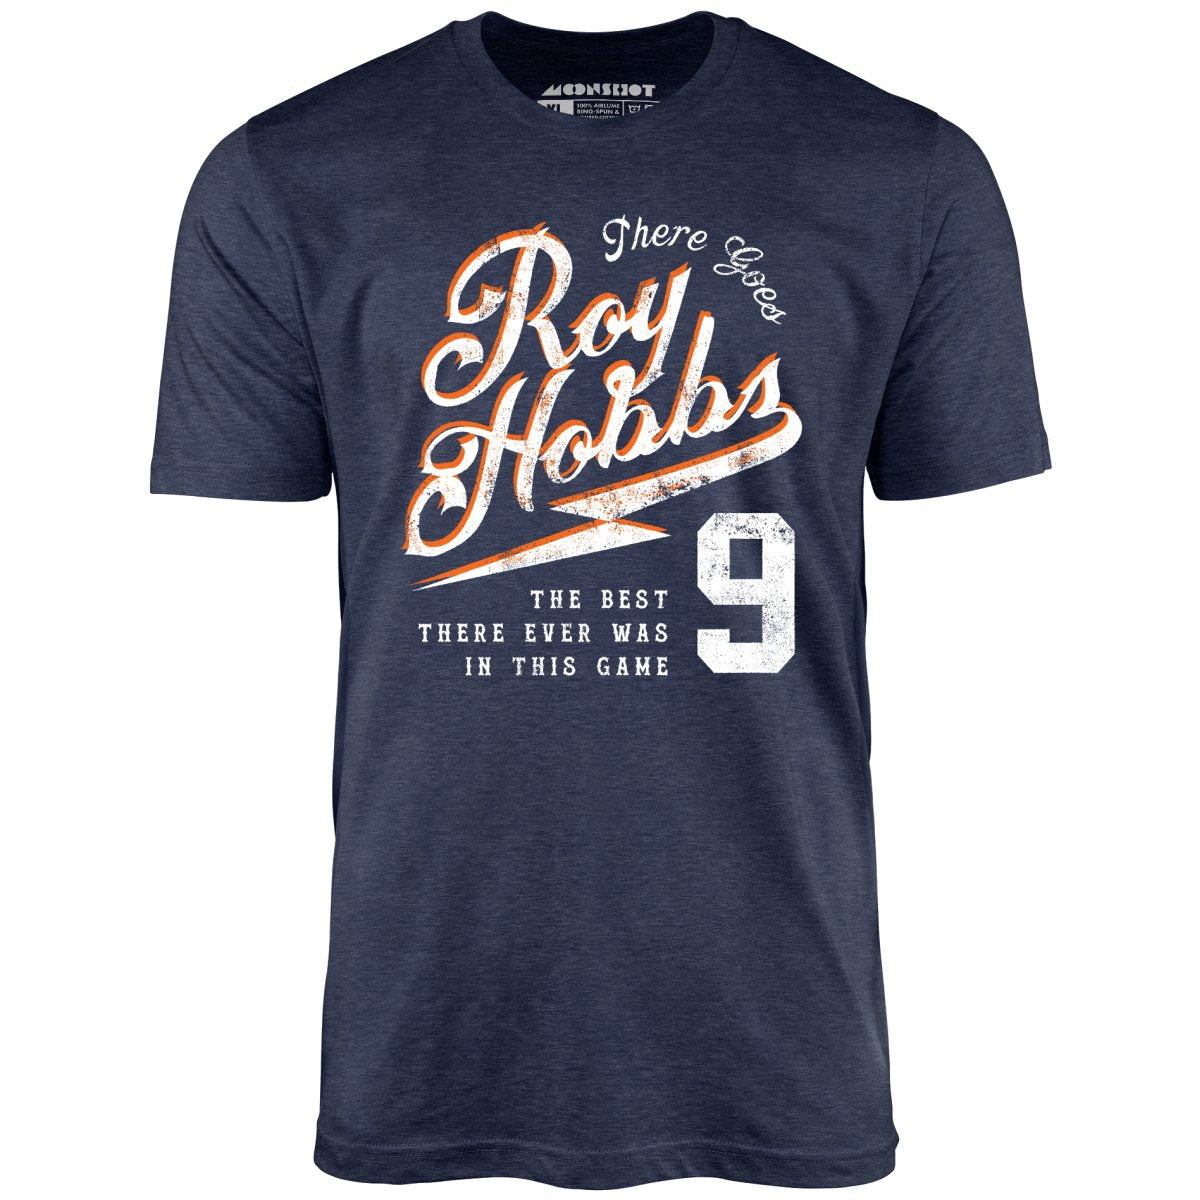 There Goes Roy Hobbs - Unisex T-Shirt